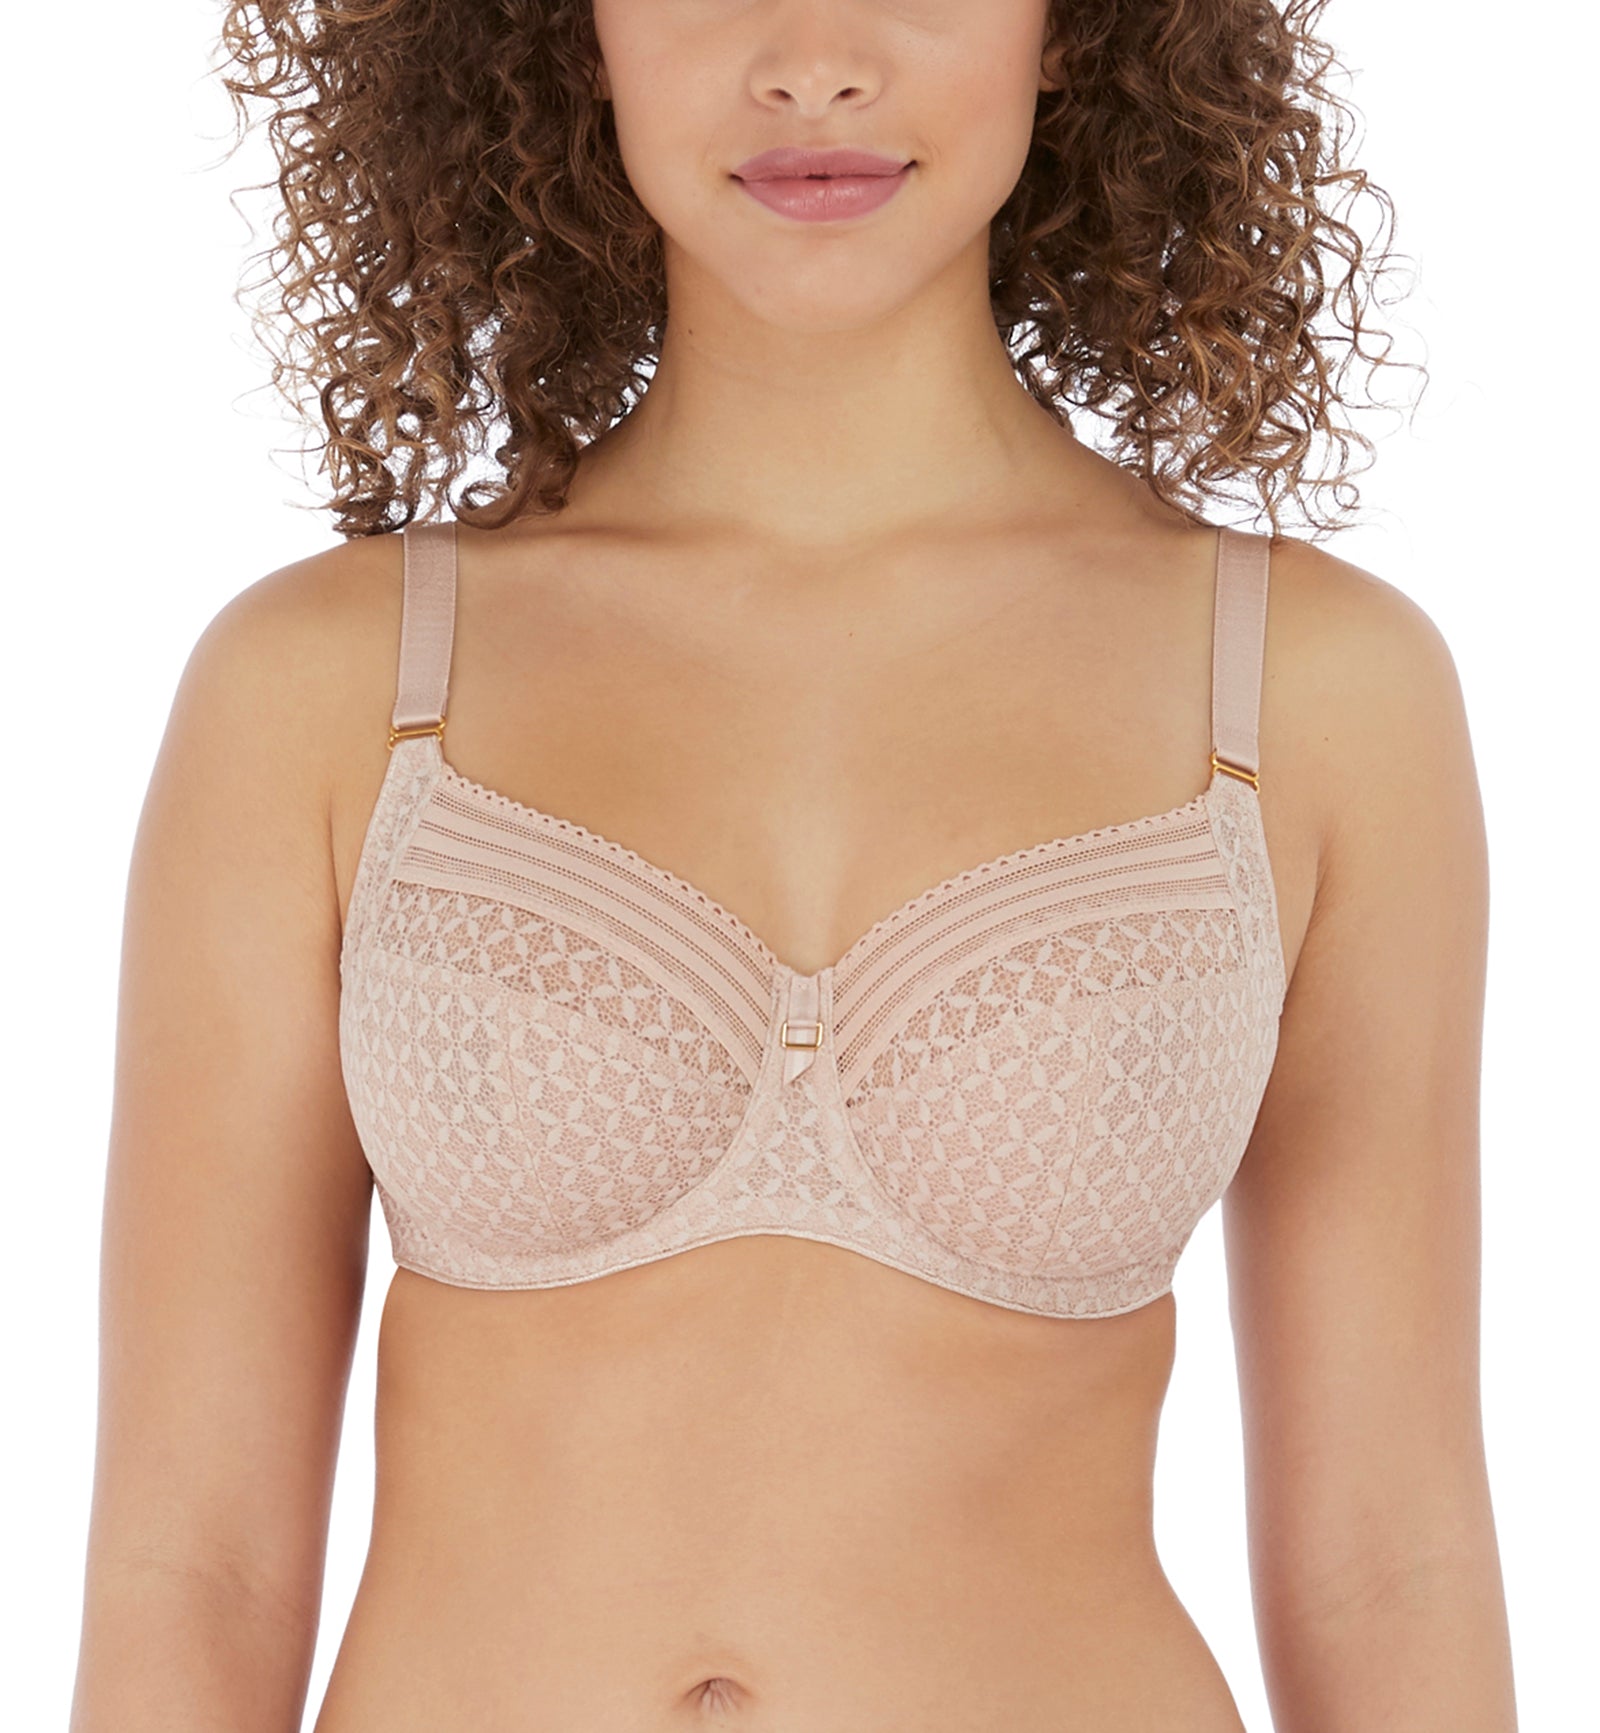 Freya Viva Side Support Underwire Bra (5641),28F,Lace Natural Beige - Lace Natural Beige,28F